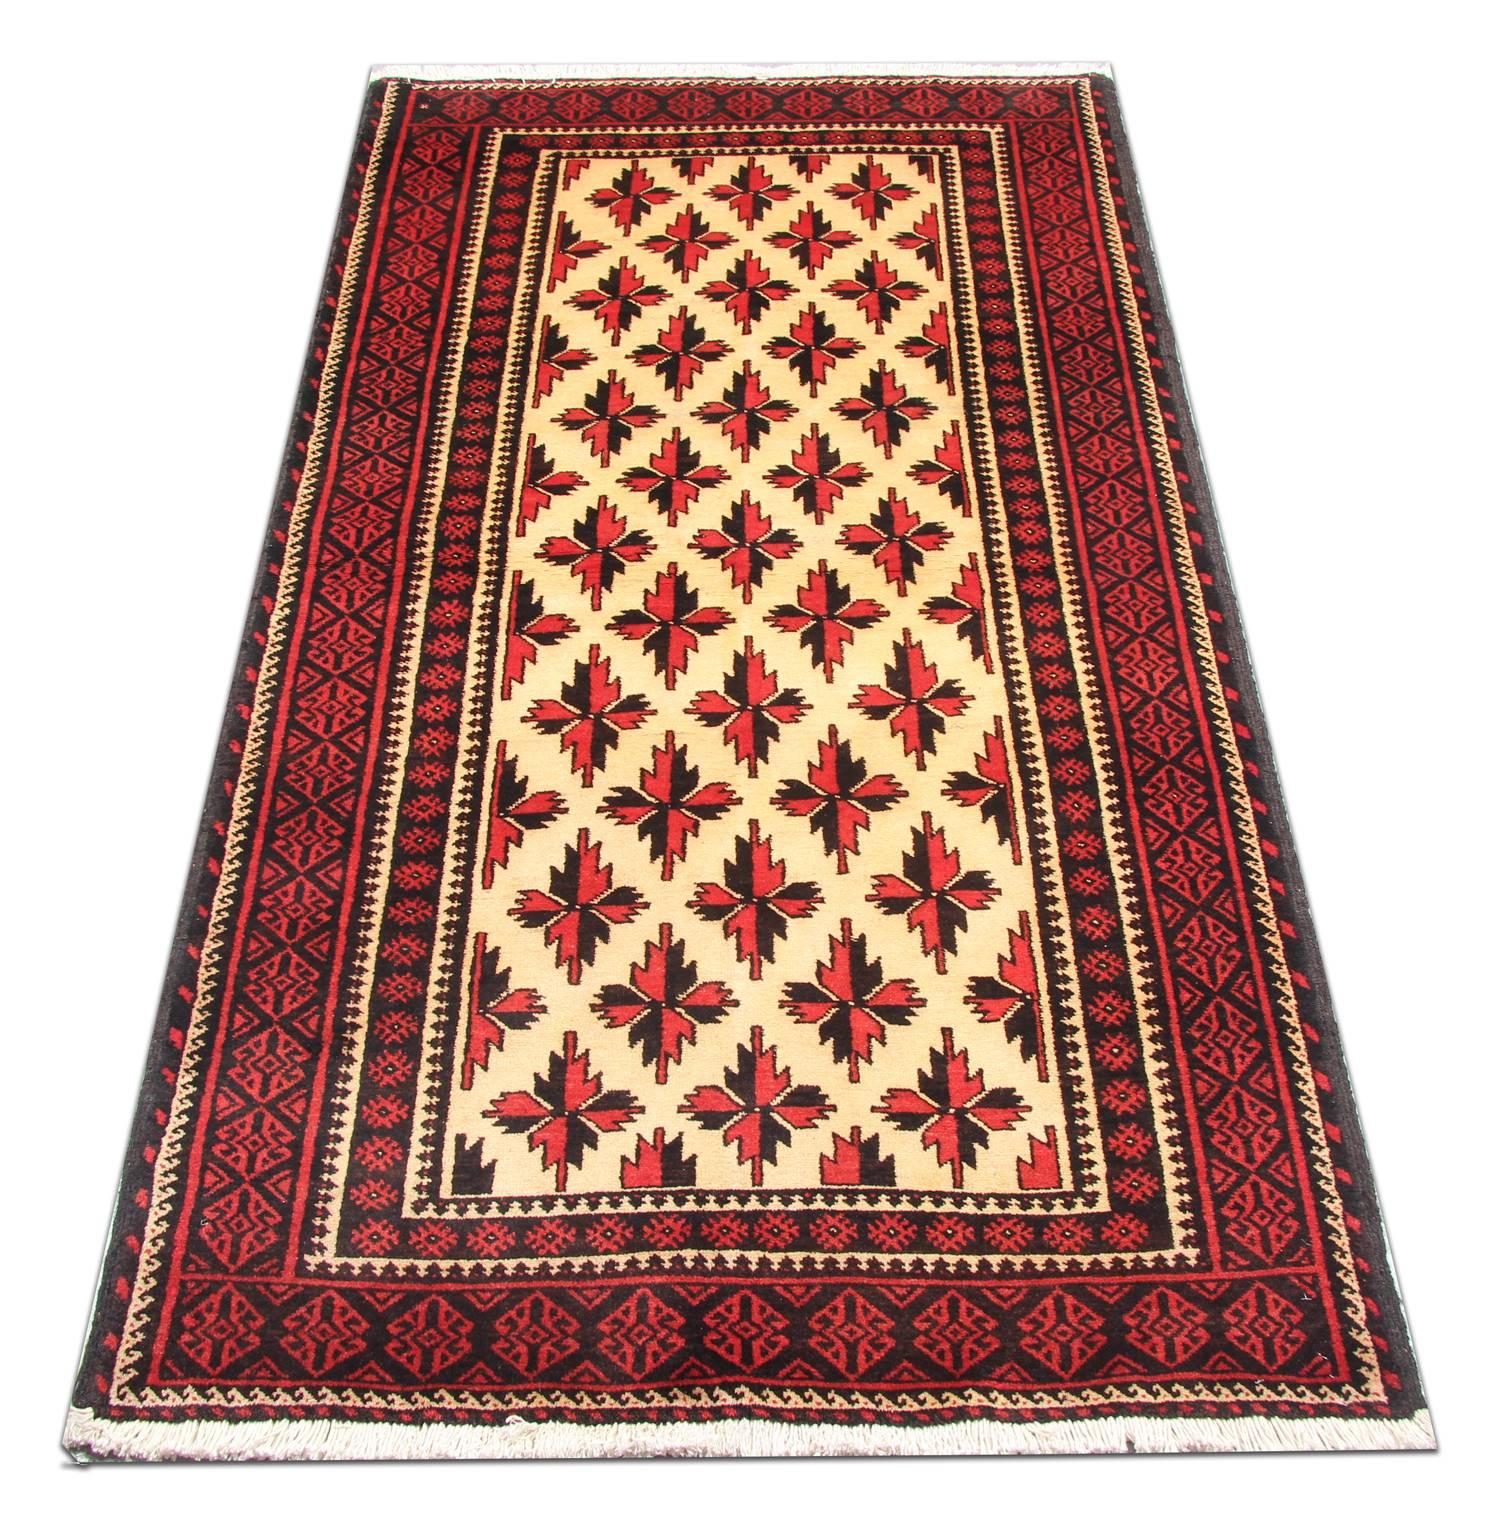 This elegant rug has been woven by hand and features a fantastic repeat pattern design woven in red and black on an ivory field. This is then enclosed by a highly-detailed repeat pattern red and blue border. This rug would make a perfect addition to